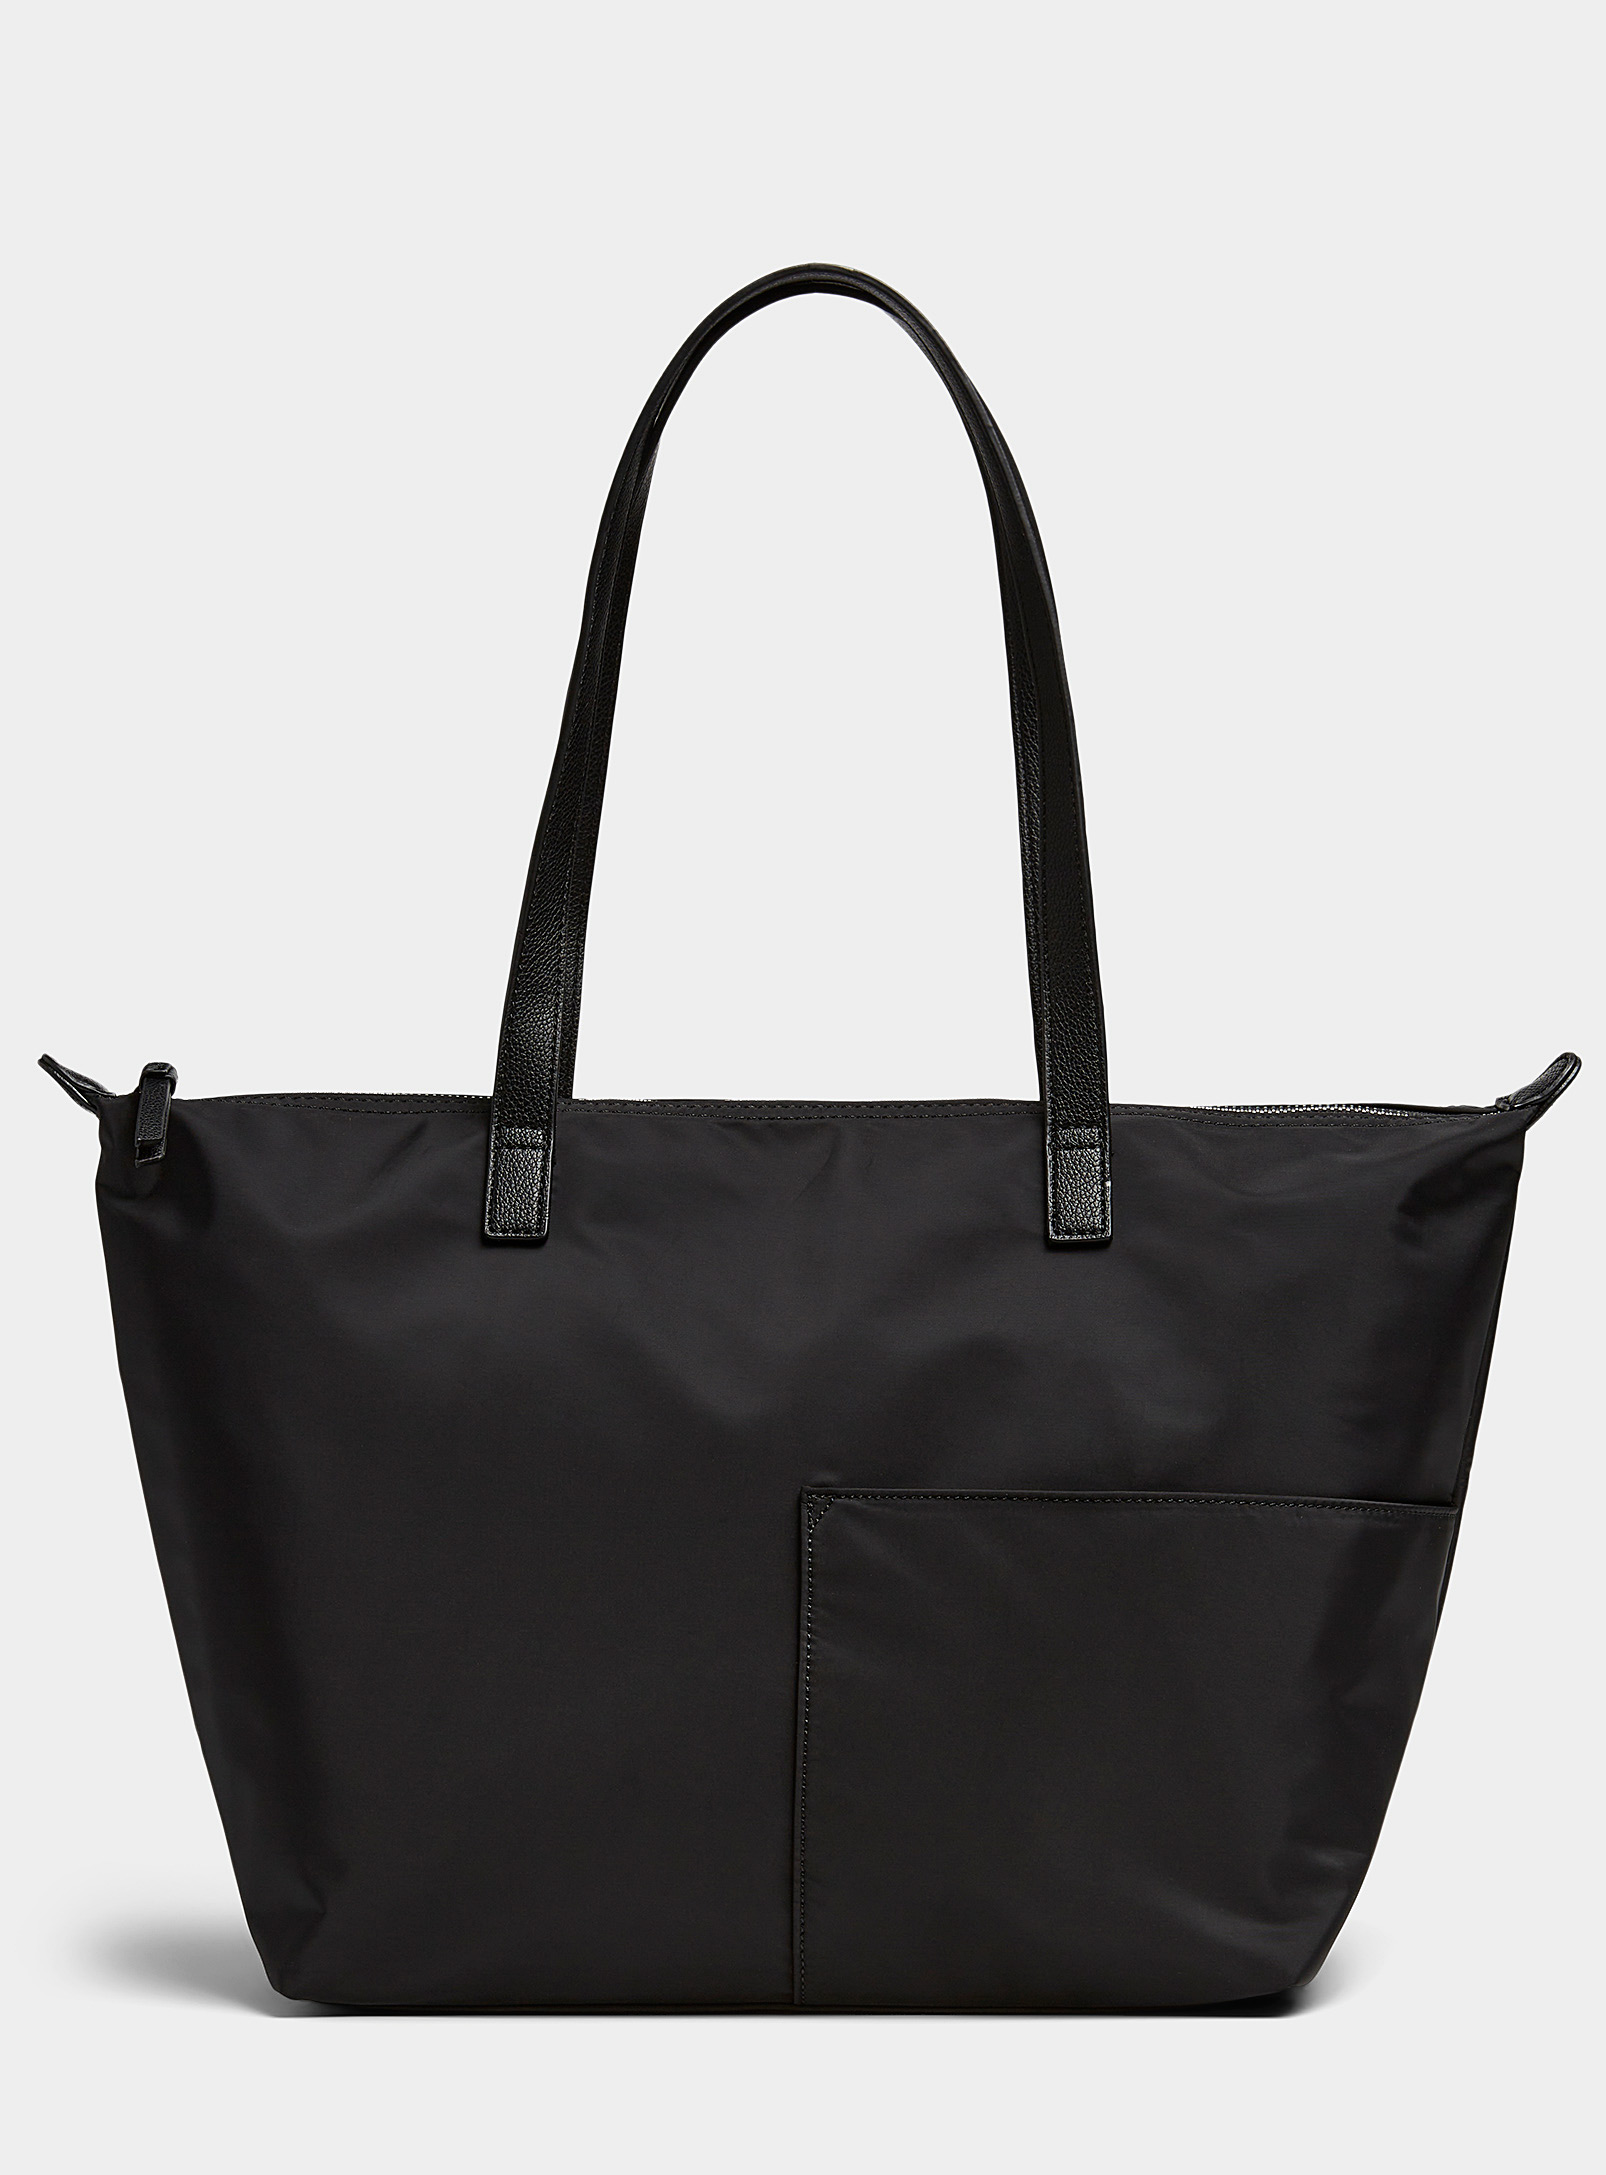 Simons - Women's Patch-pocket recycled Tote Bag